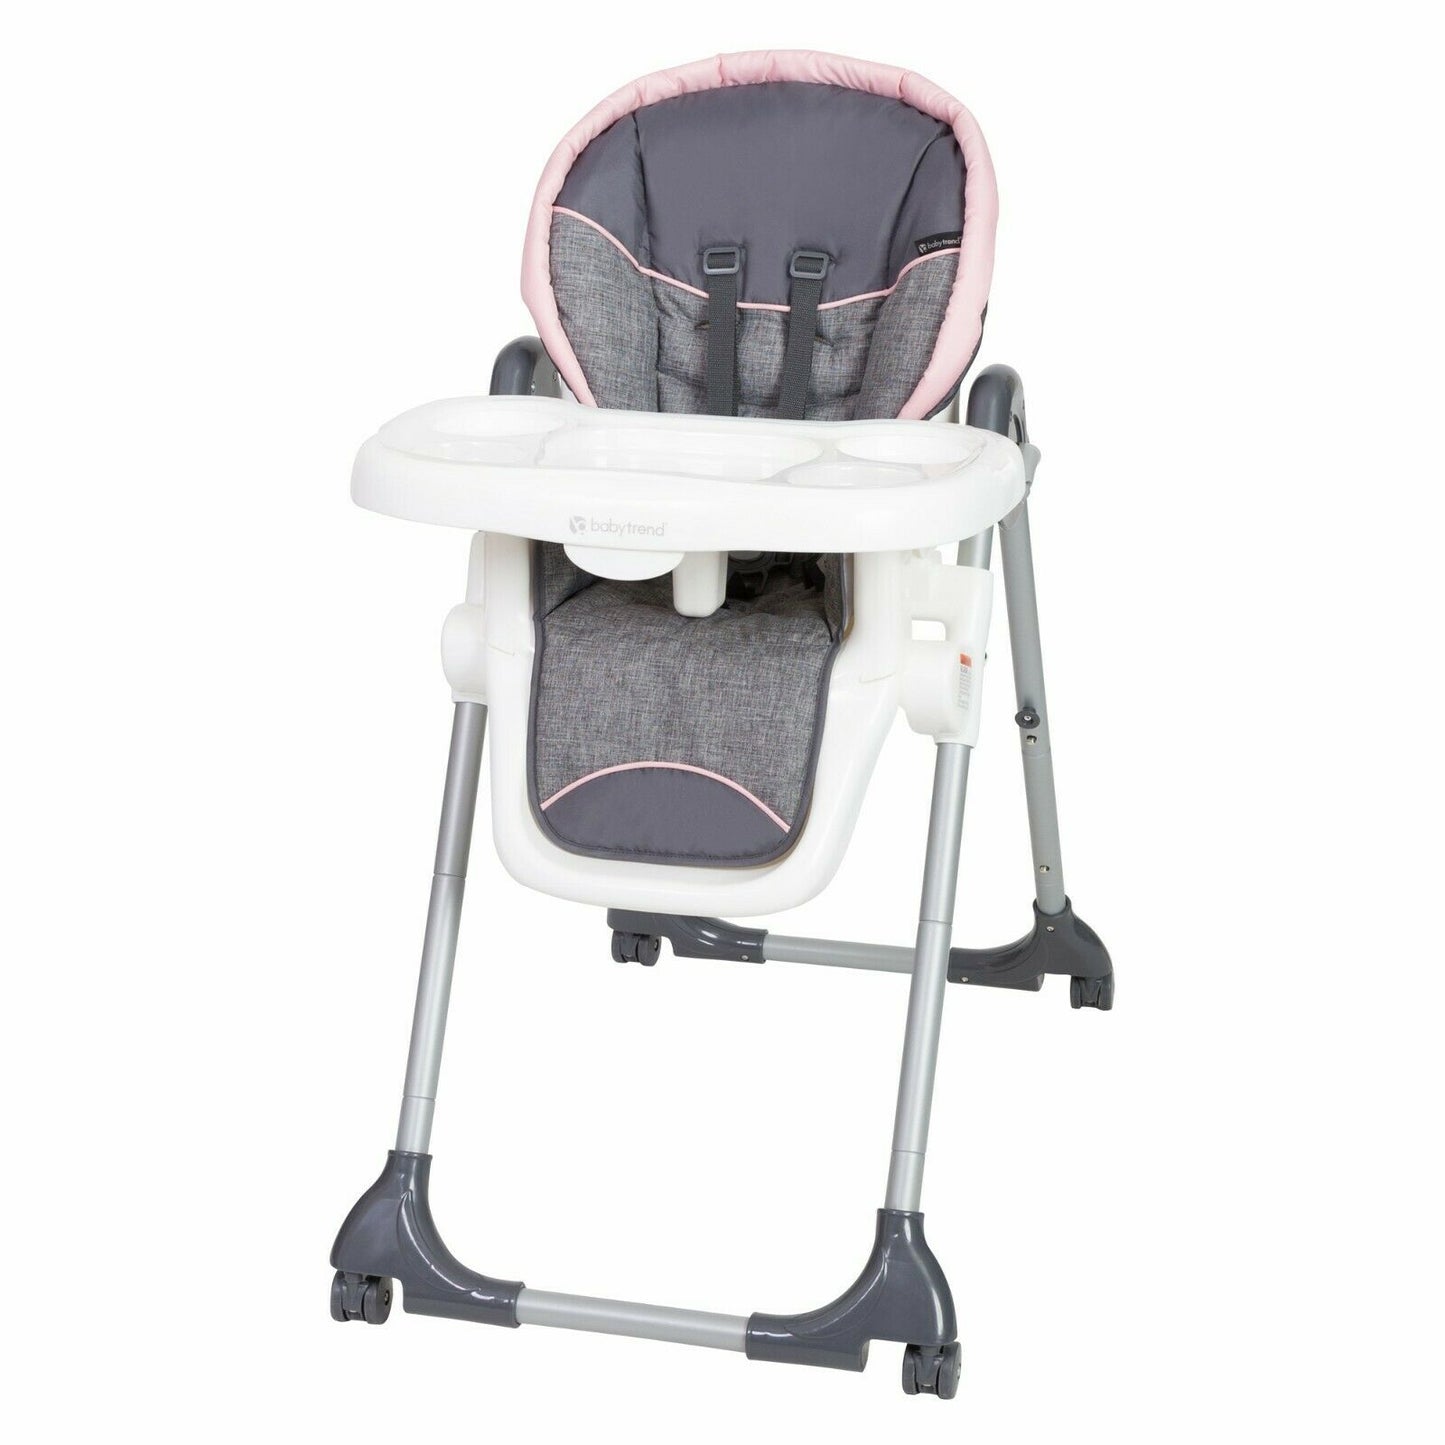 Comfortable Baby Stroller with Car Seat High Chair Playard Swing Travel System